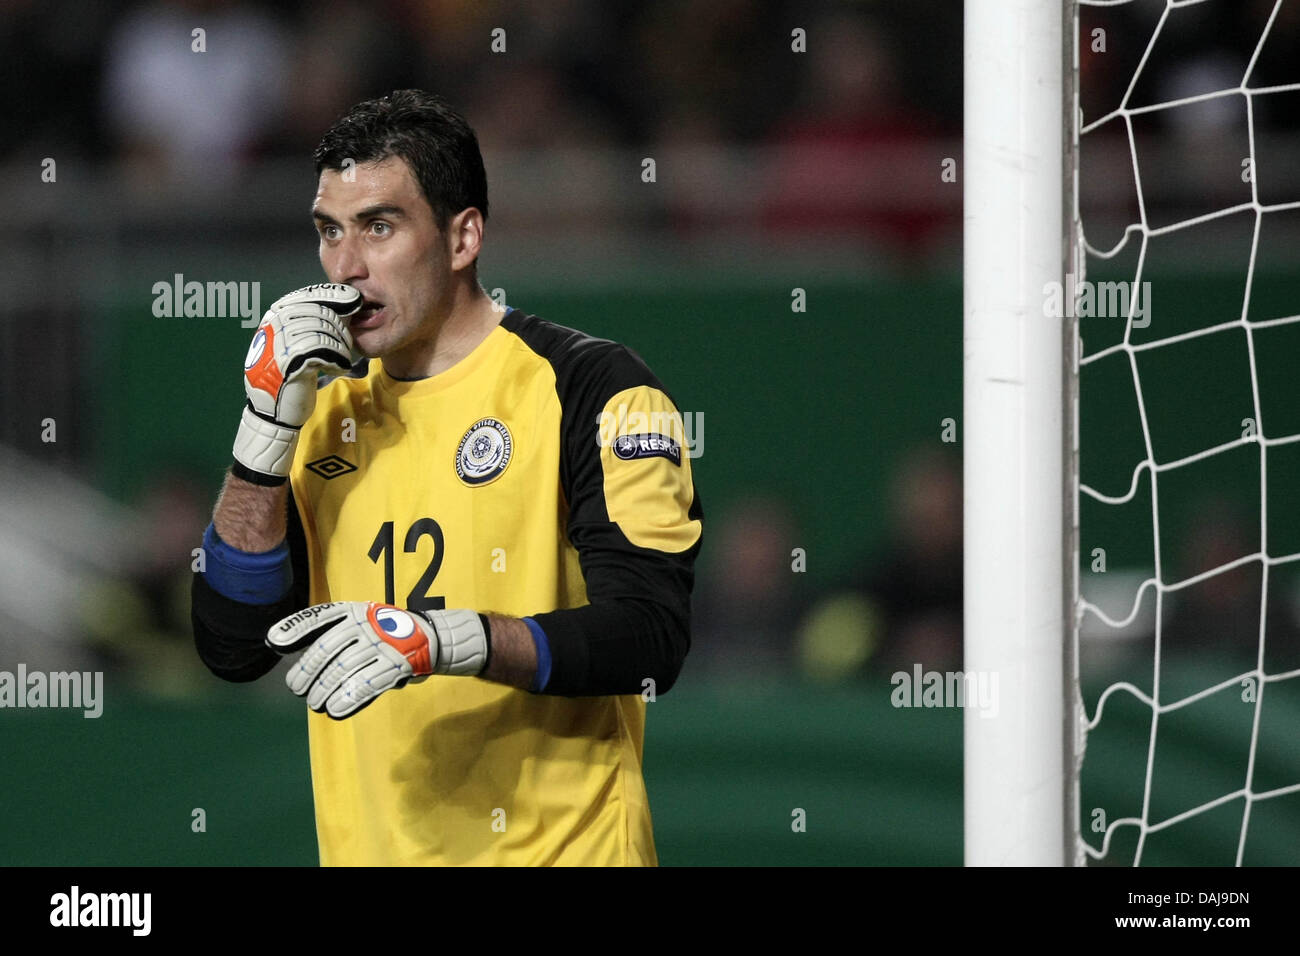 Goal keeper David Loria of Kazakhstan gestures during the UEFA Euro 2012 qualifying group A soccer match between Germany and Kazakhstan at the Fritz-Walter stadium in Kaiserslautern, Germany, 26 March 2011. Photo: Fredrik von Erichsen Stock Photo